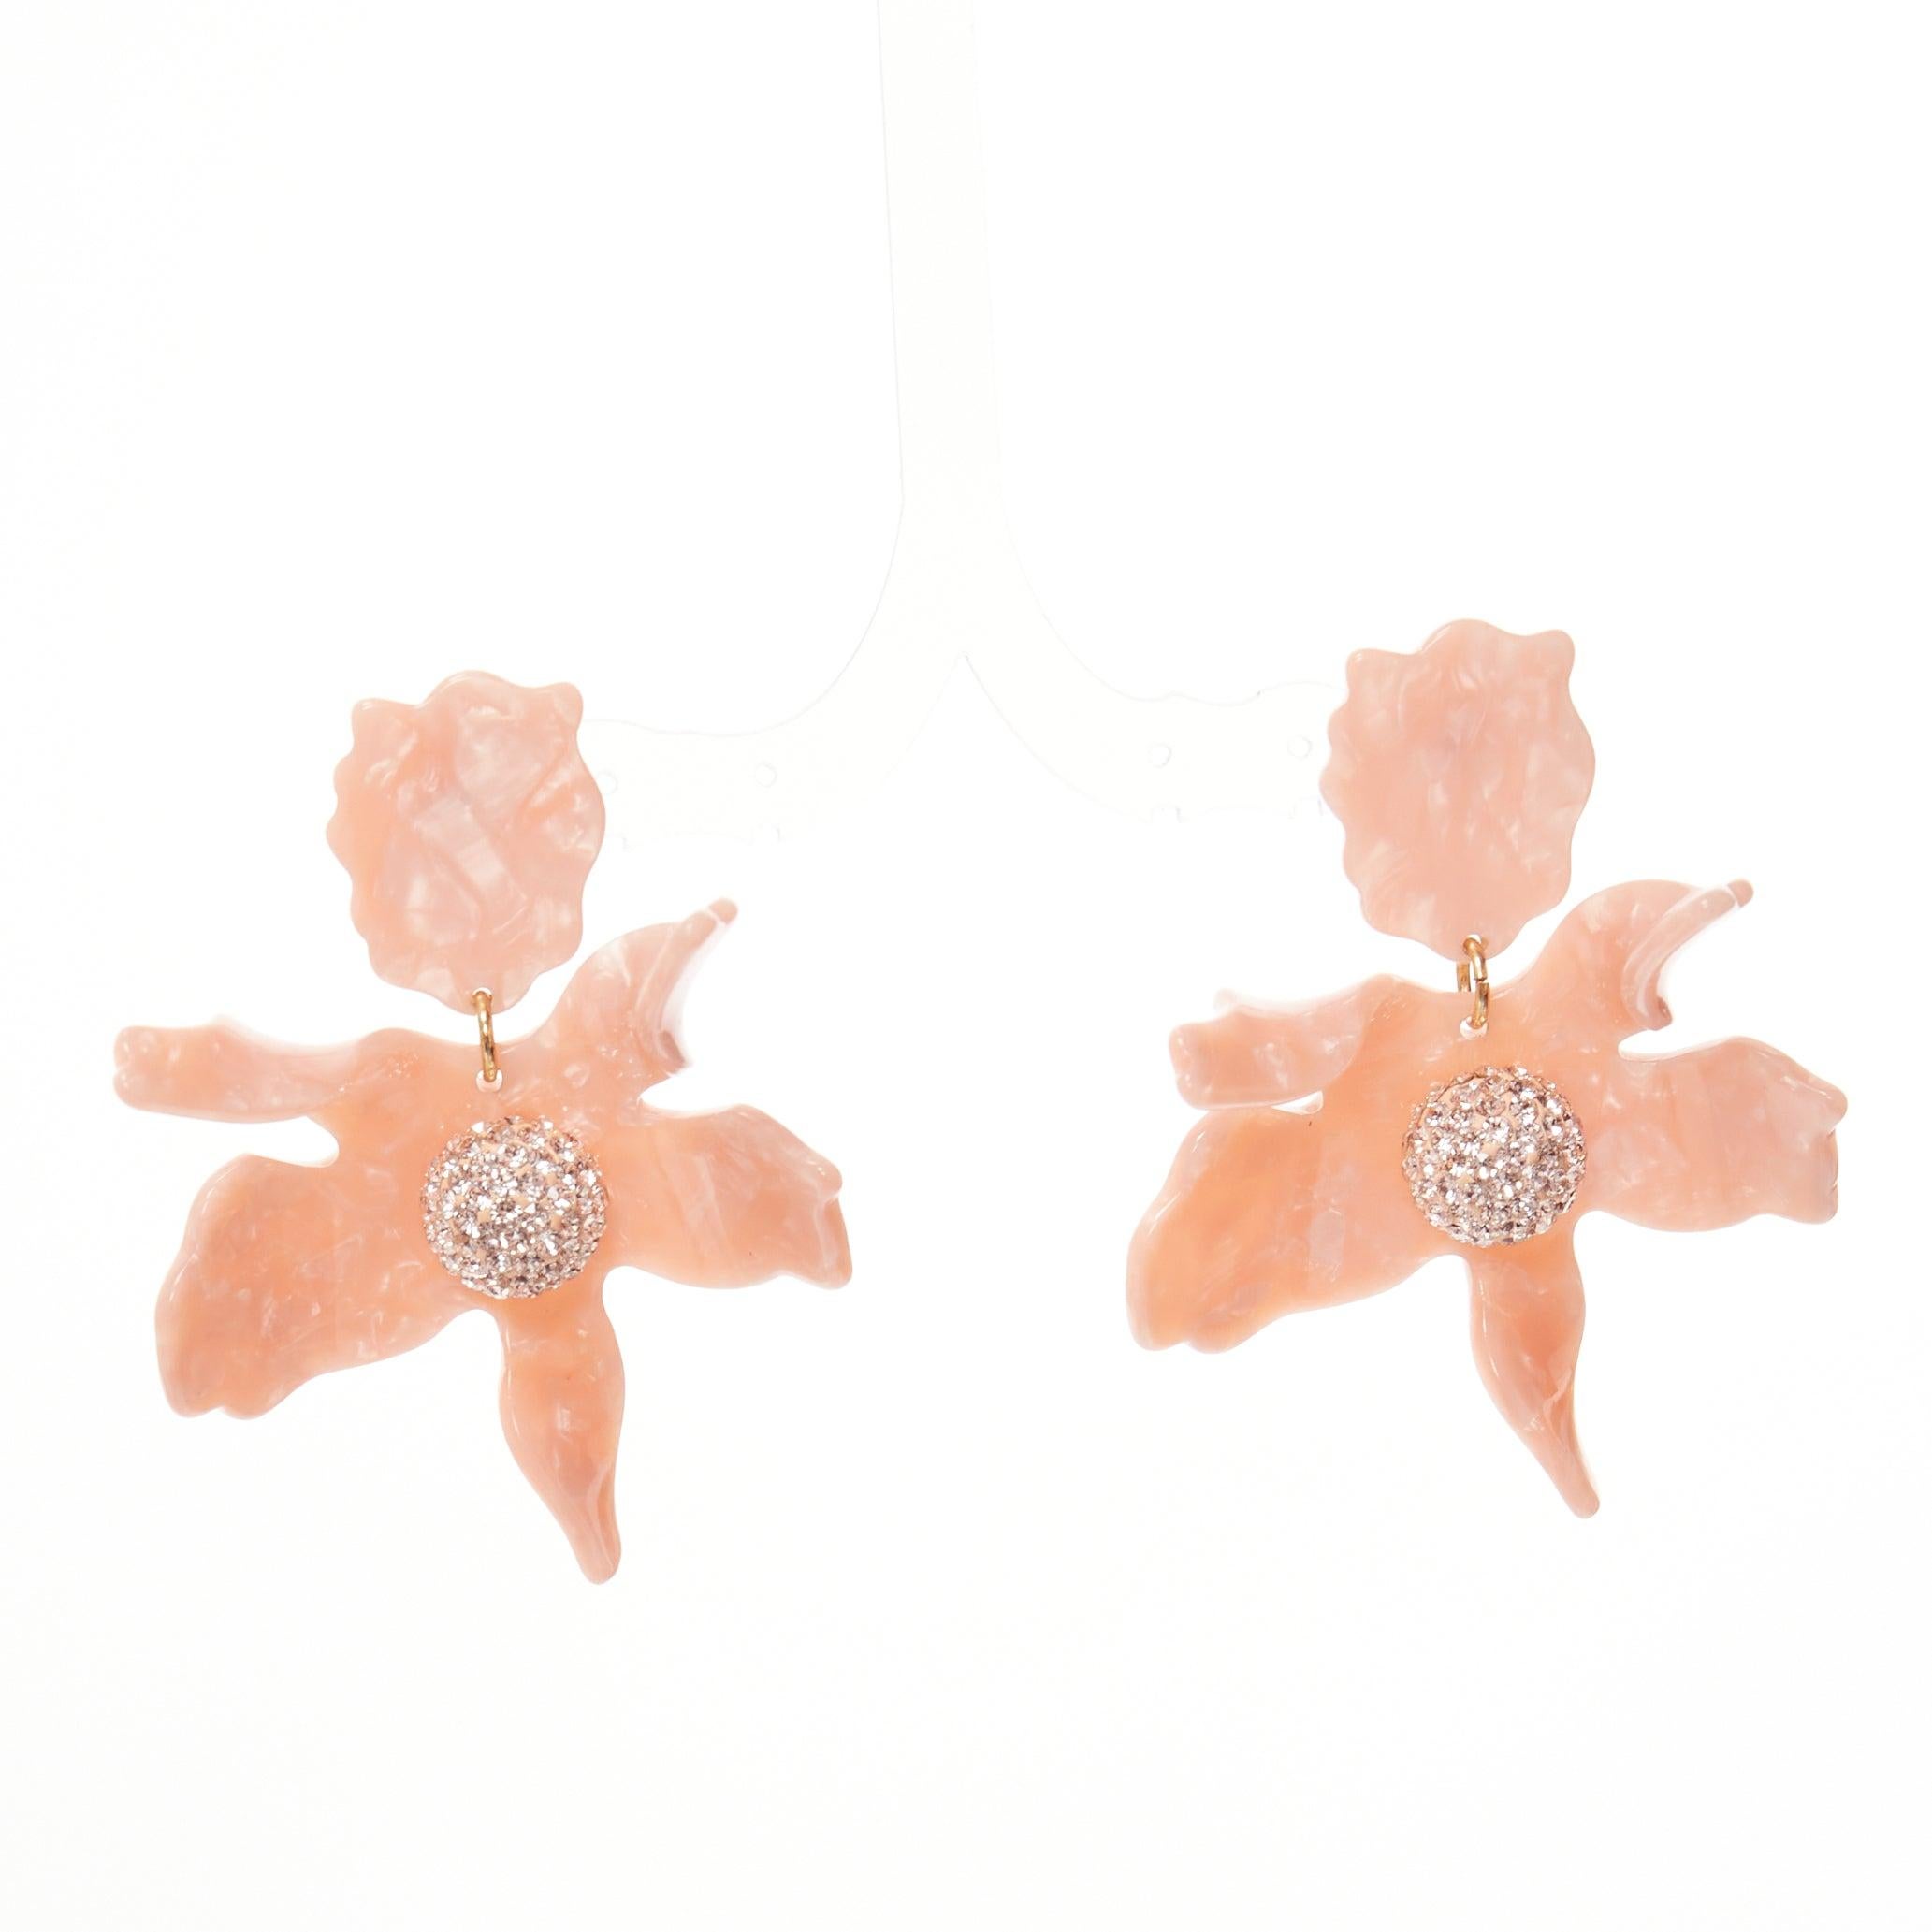 LELE SADOUGHI pink marbled acrylic flower silver crystals drop pin earrings
Reference: AAWC/A01259
Brand: Lele Sadoughi
Material: Acrylic
Color: Pink, Silver
Pattern: Floral
Closure: Pin
Lining: Pink Acrylic

CONDITION:
Condition: Excellent, this